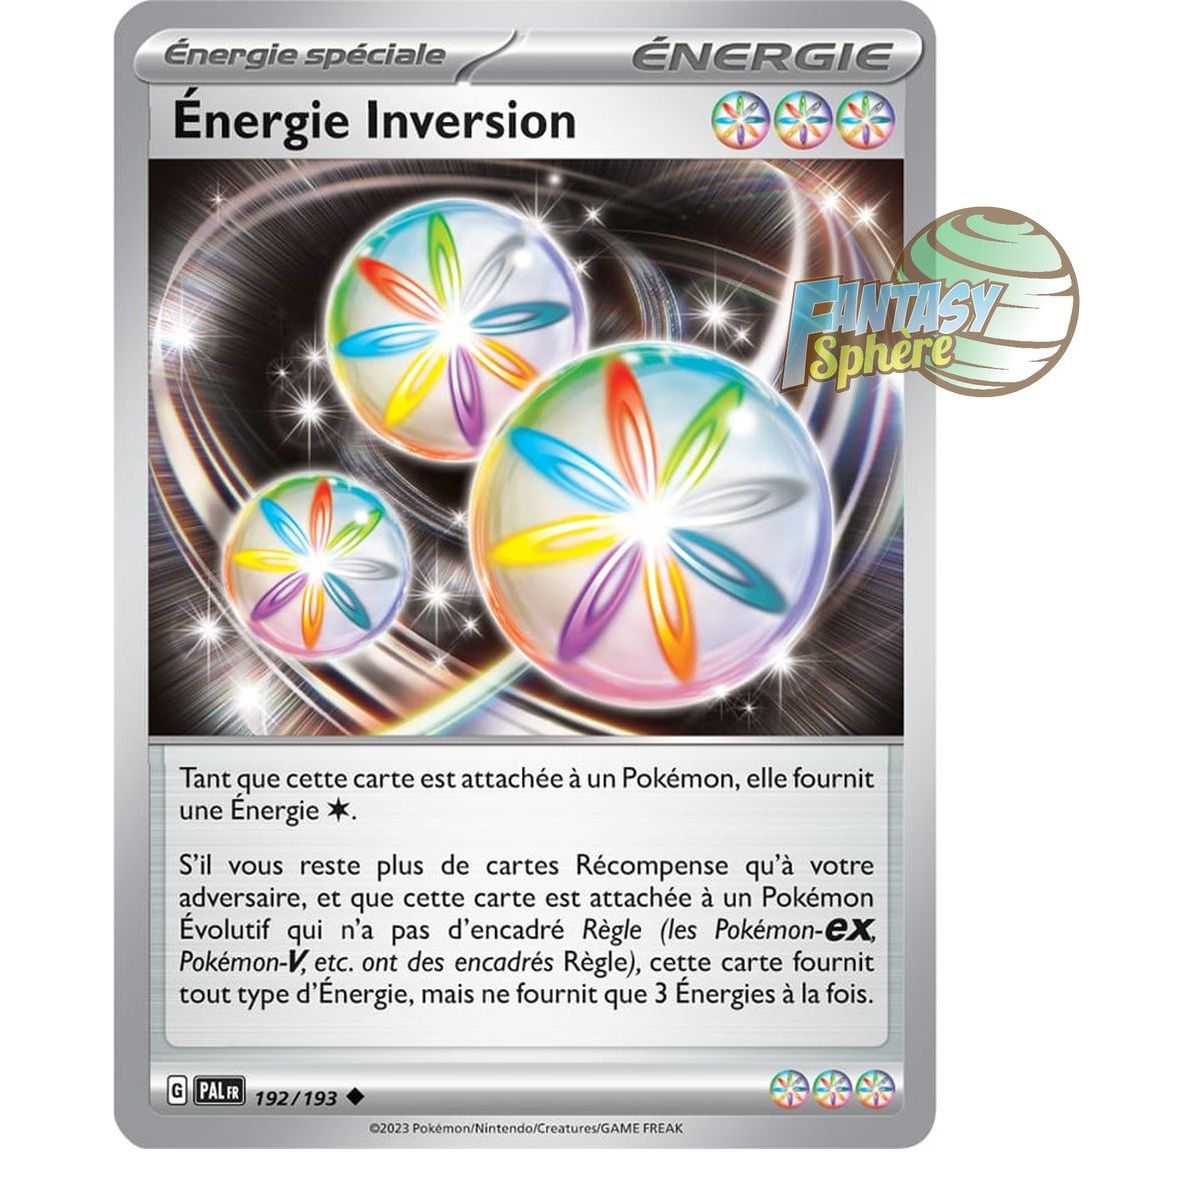 Reversal Energy - Uncommon 192/193 - Scarlet and Violet Evolution in Paldea